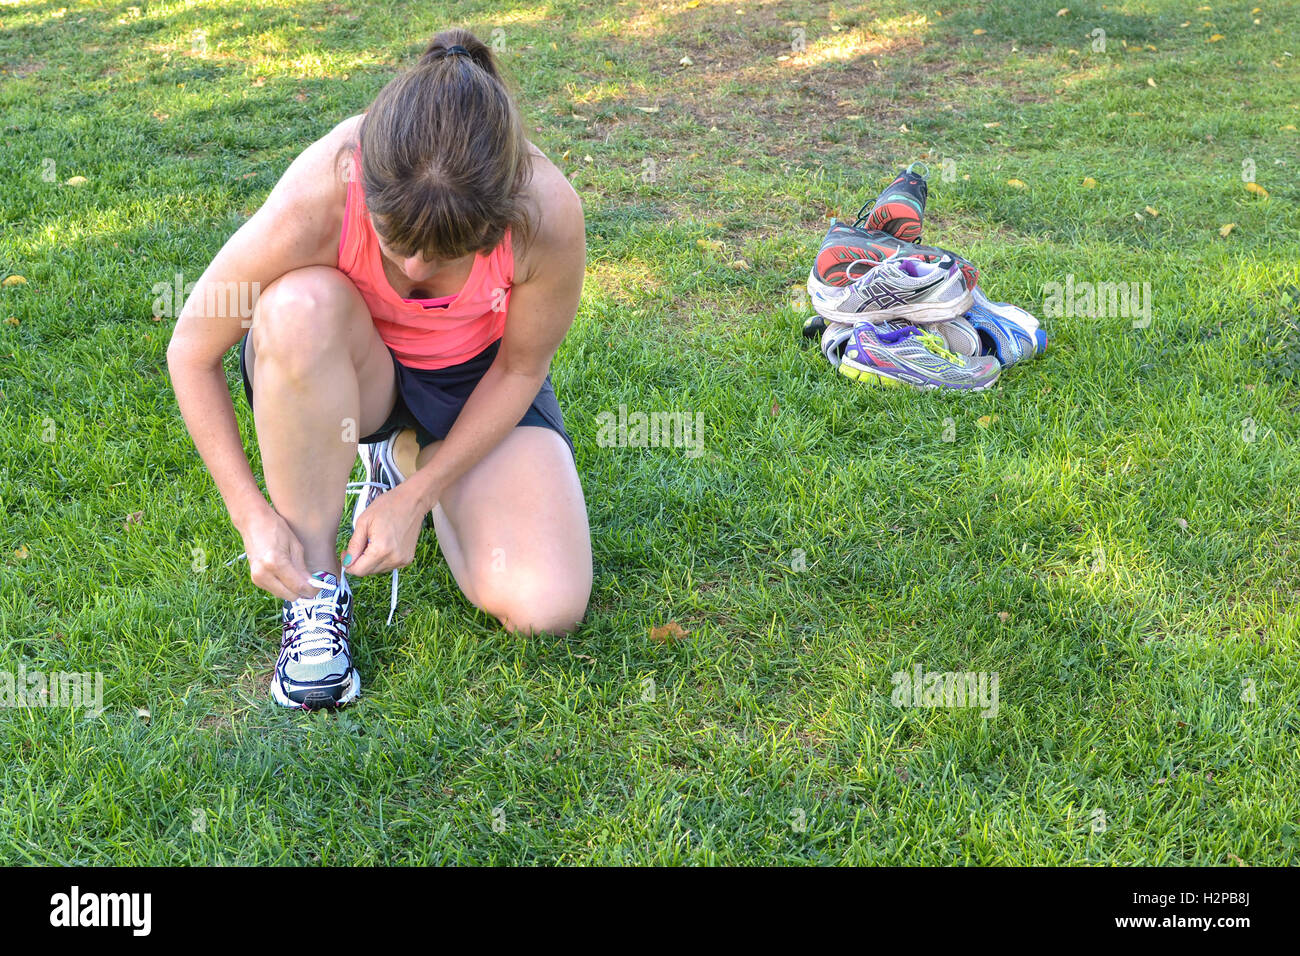 Middle-aged woman tying her running  shoes in front of a pile of old shoes Stock Photo